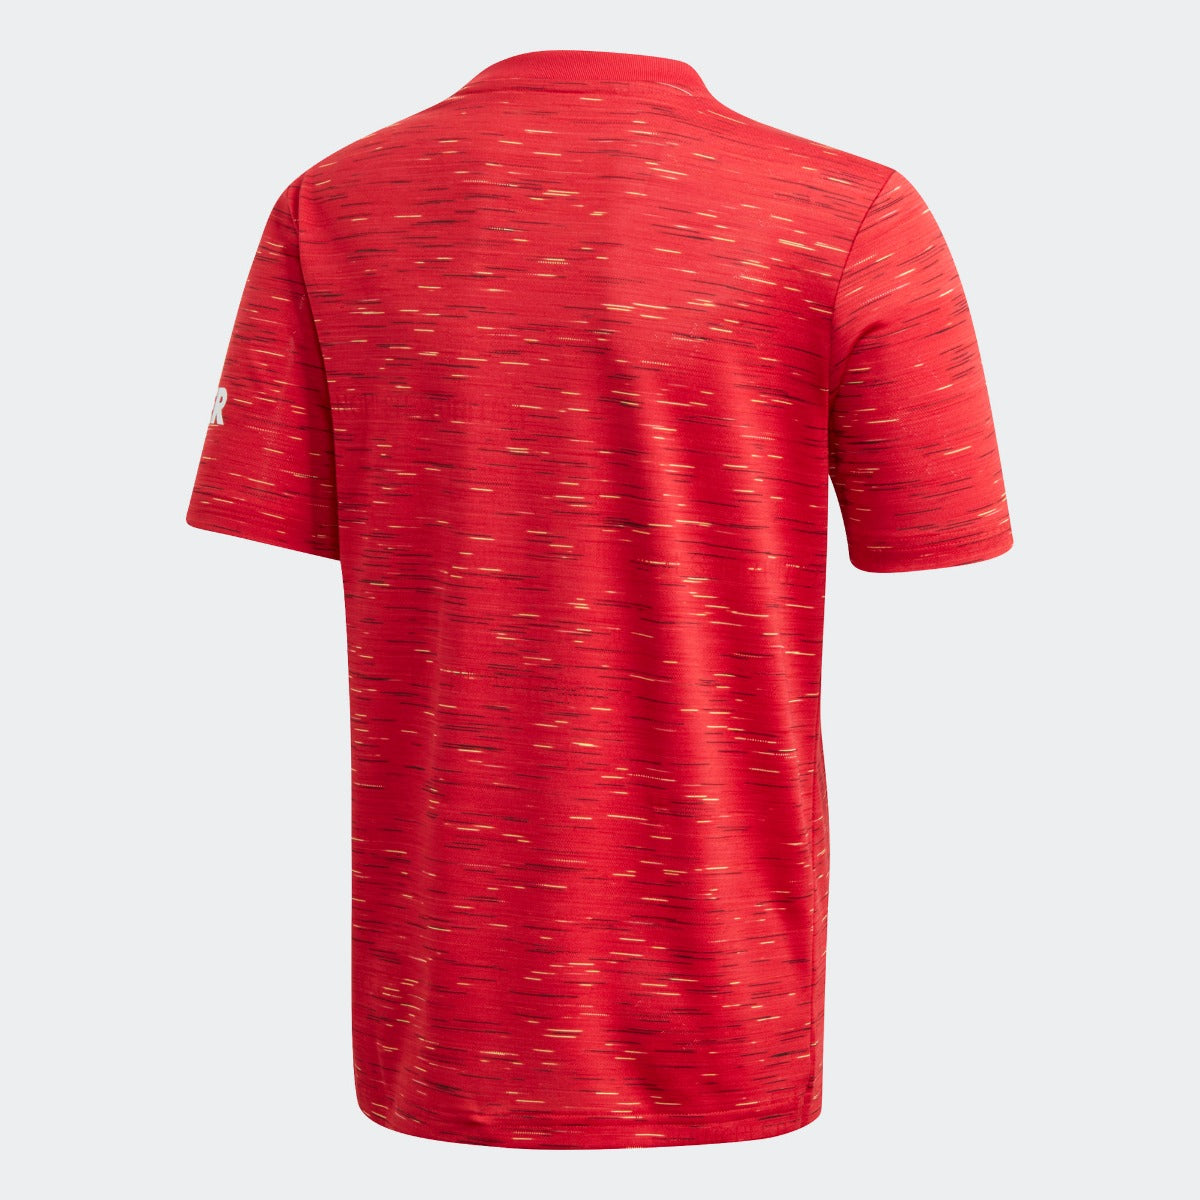 Adidas 2020-21 Manchester United Youth Home Jersey - Red